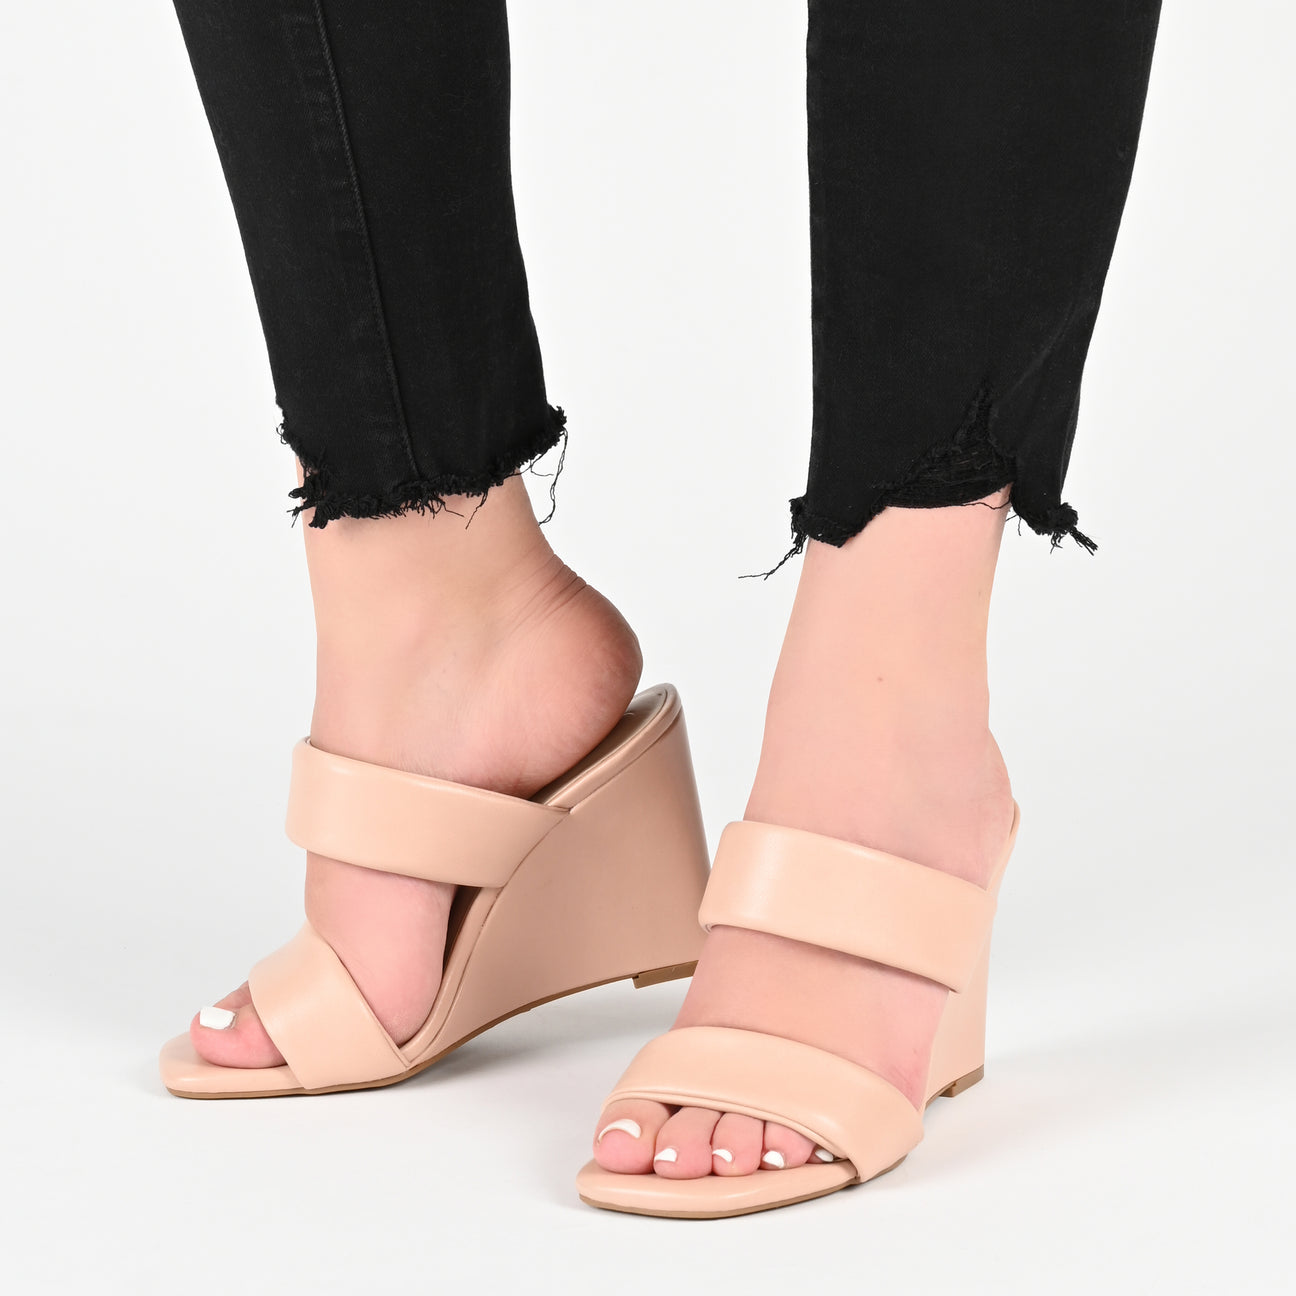 Women's Wedge Heels | Slip-On, Ankle Strap & More | Journee Collection